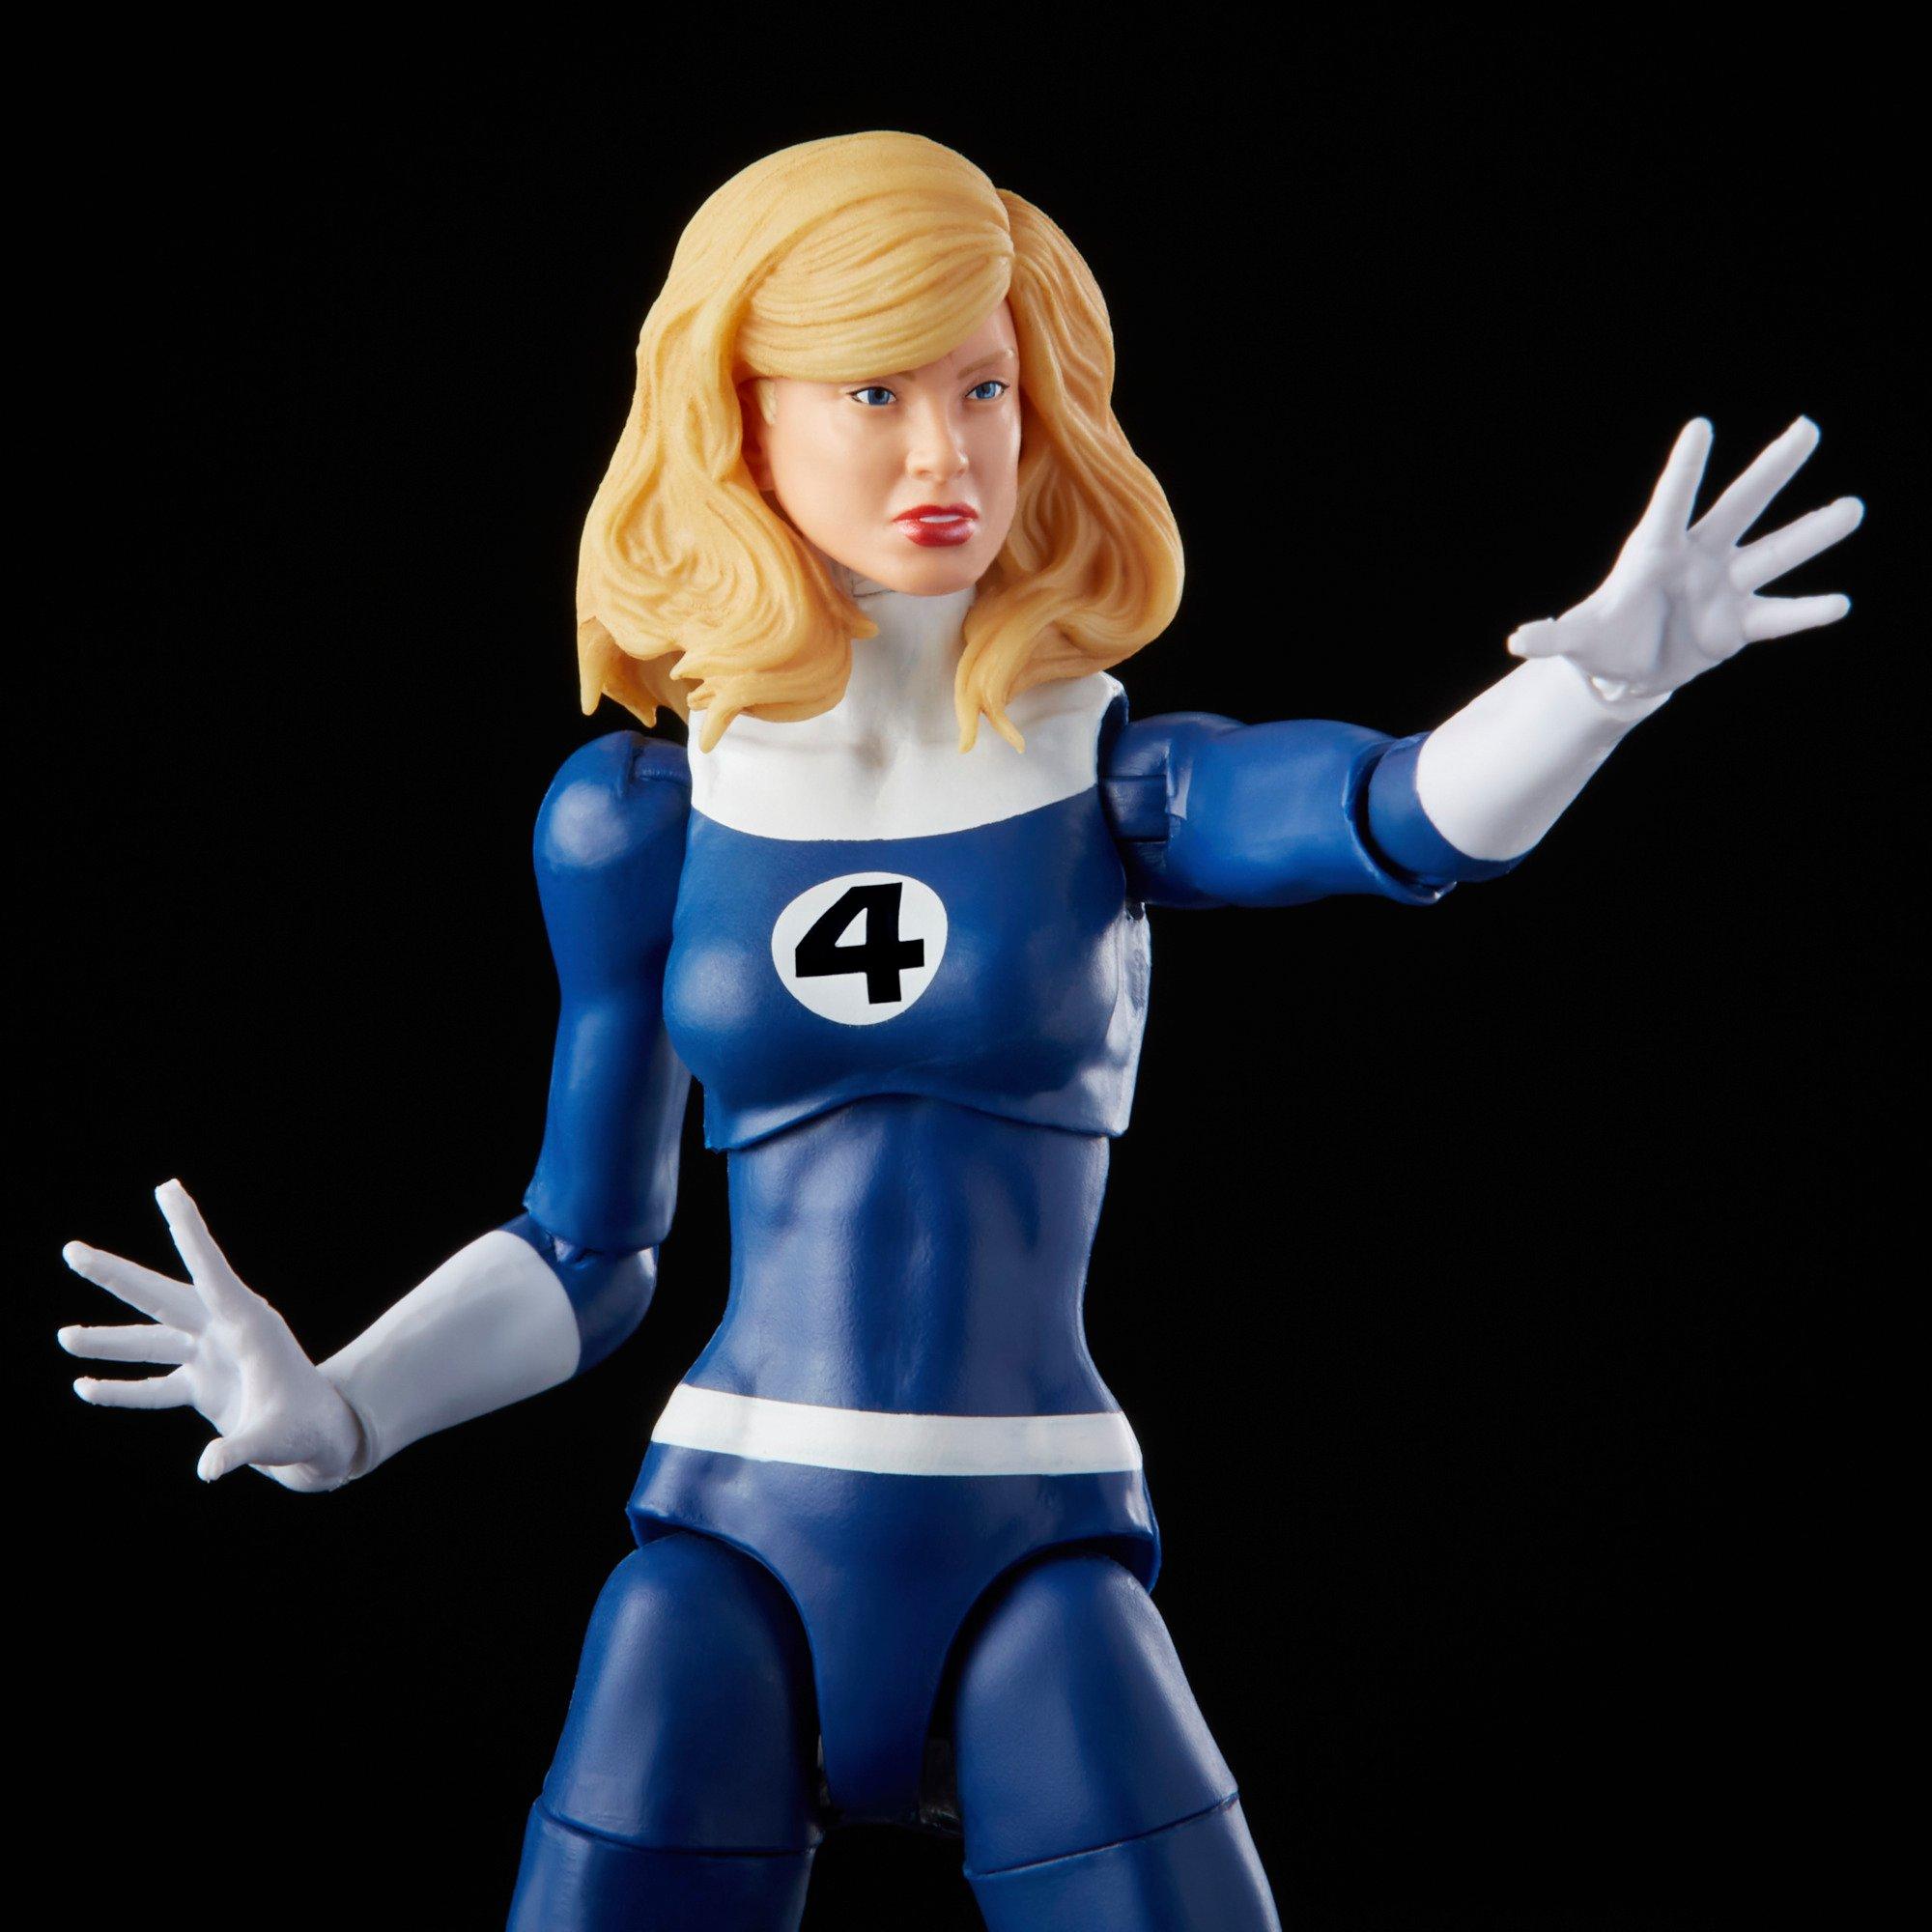 Hasbro Fantastic Four Marvel's Invisible Woman 6-in Action Figure